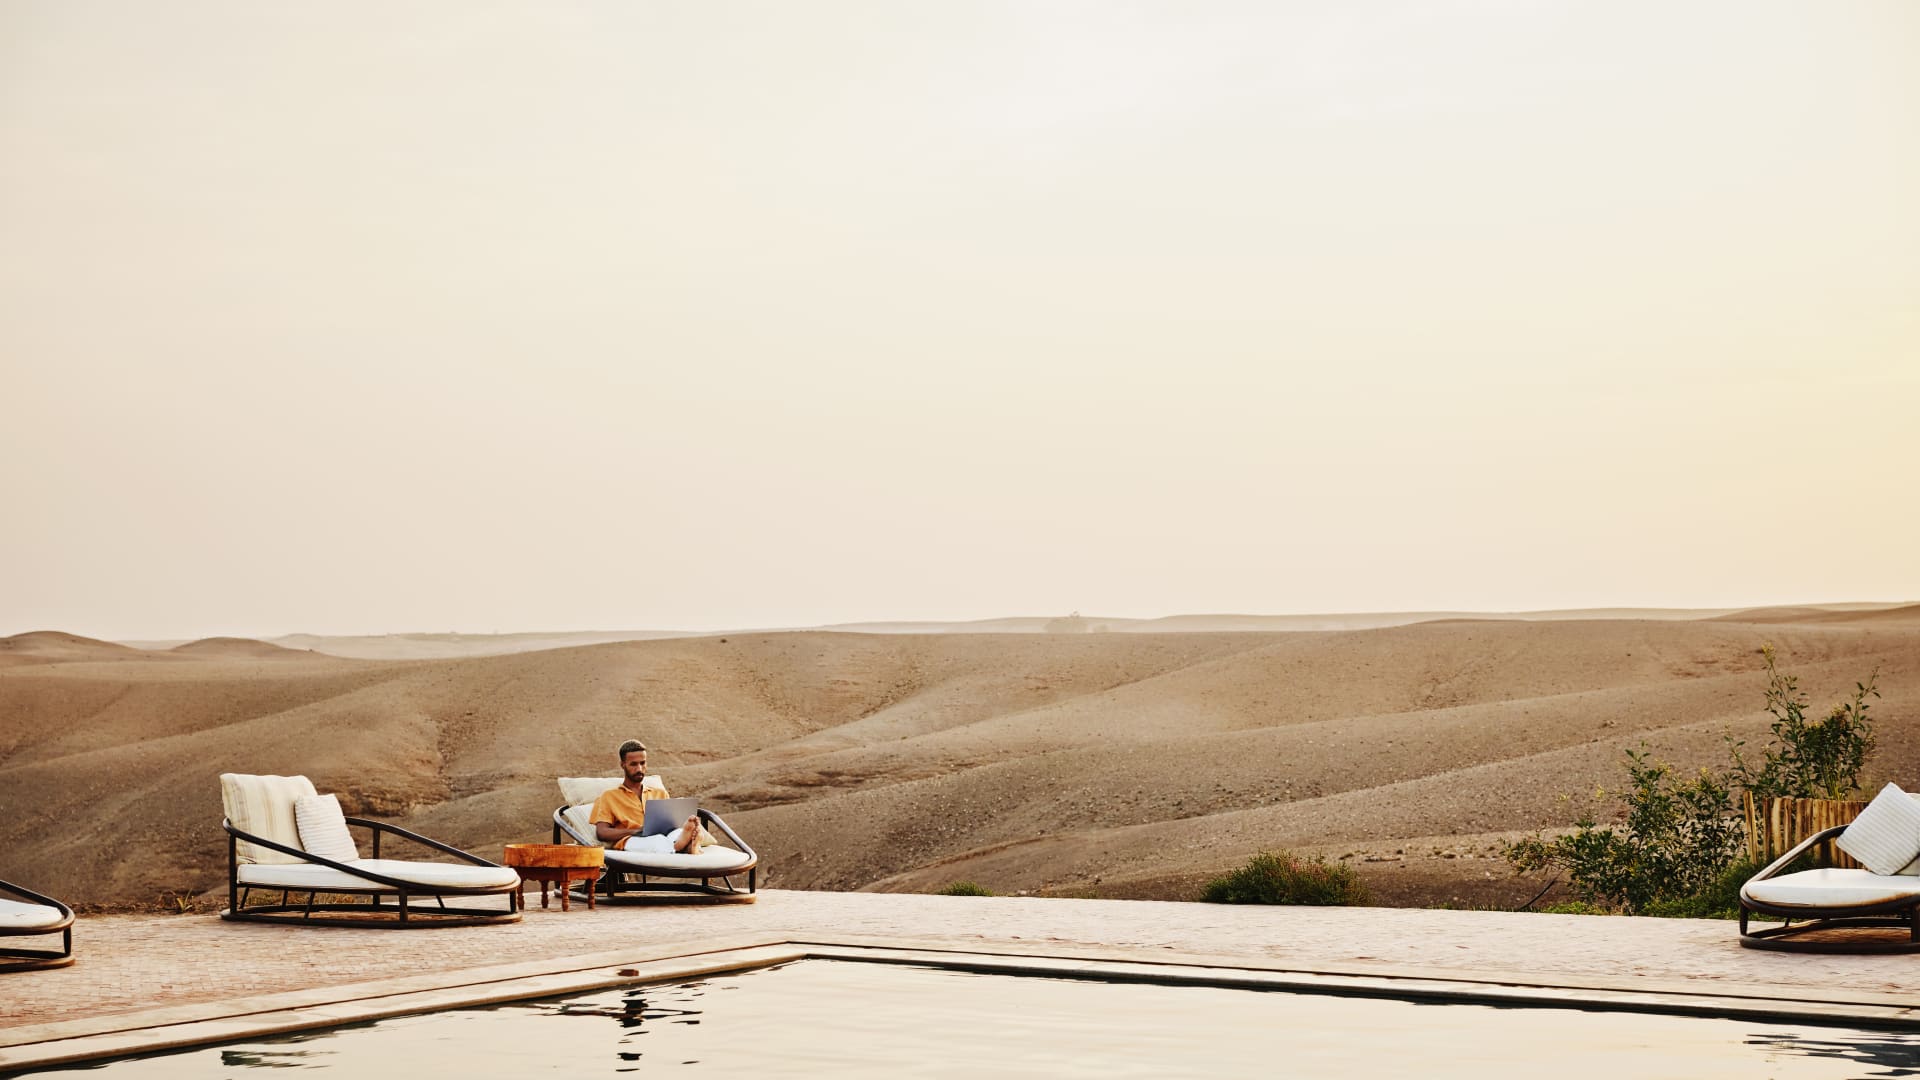 Africa is also a popular spot for wealthy travelers looking for solitude, said Sienna India.